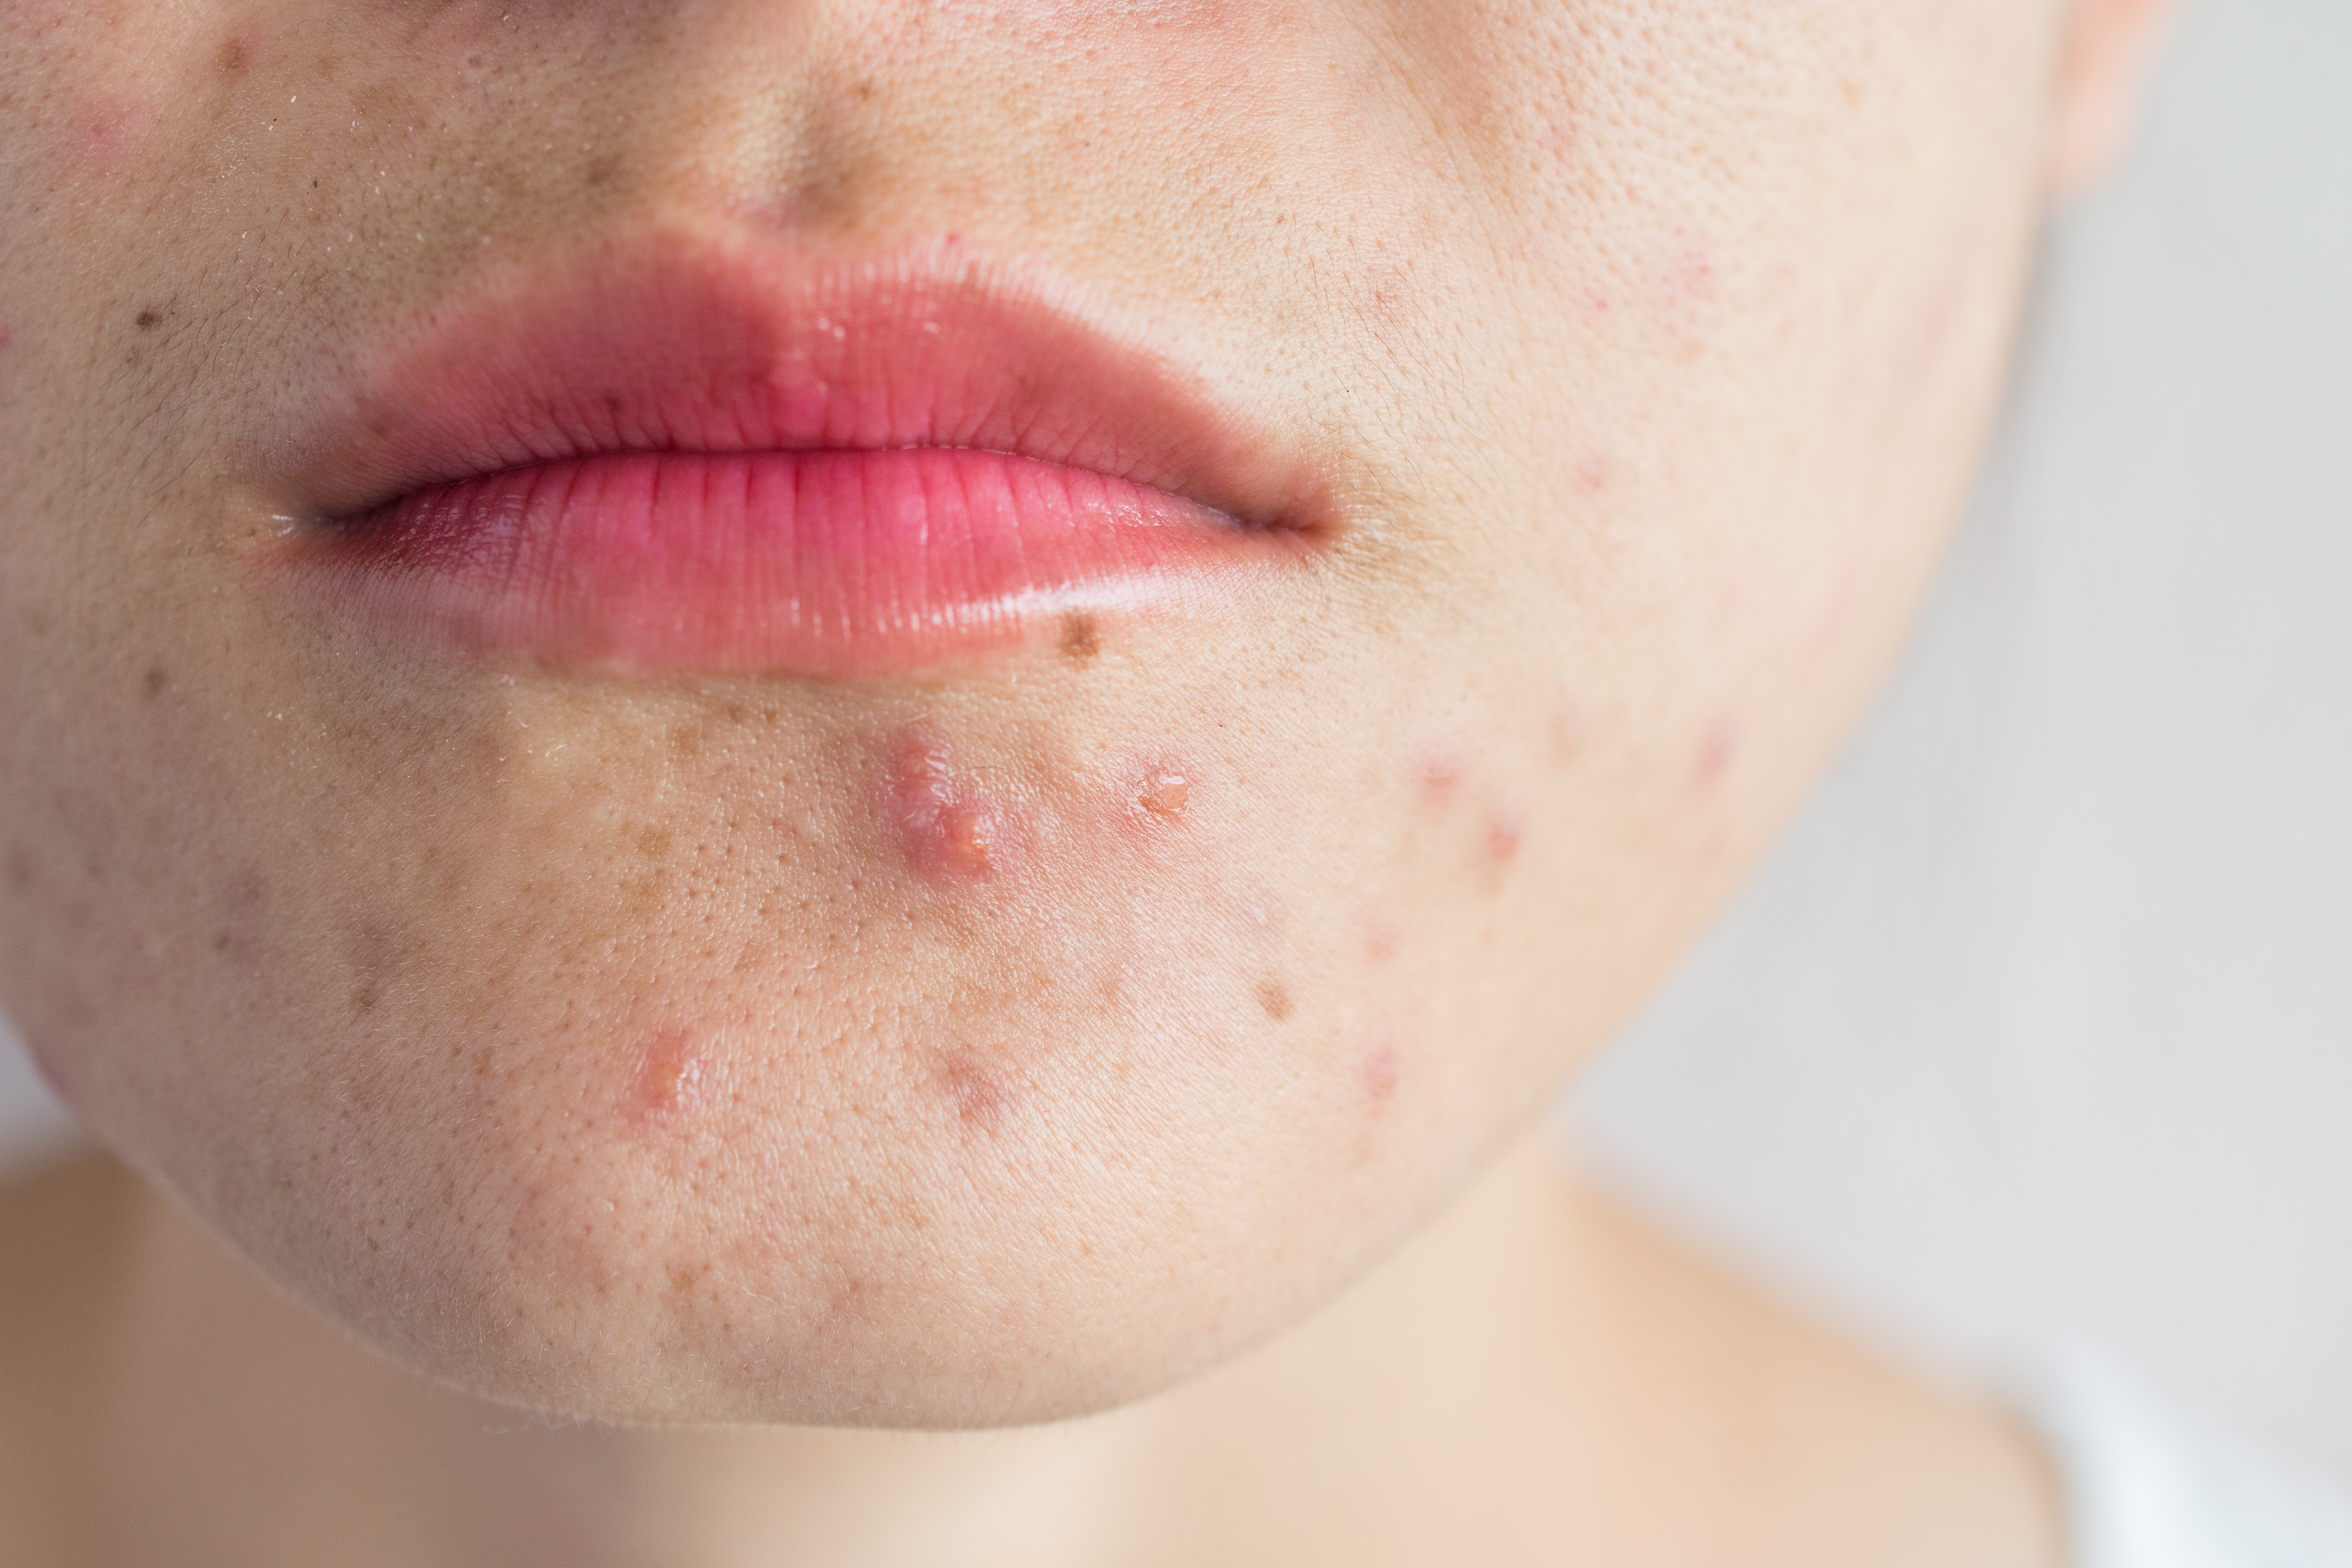 Close-up of woman half face with problems of acne inflammation (Papule and Pustule) on her face.